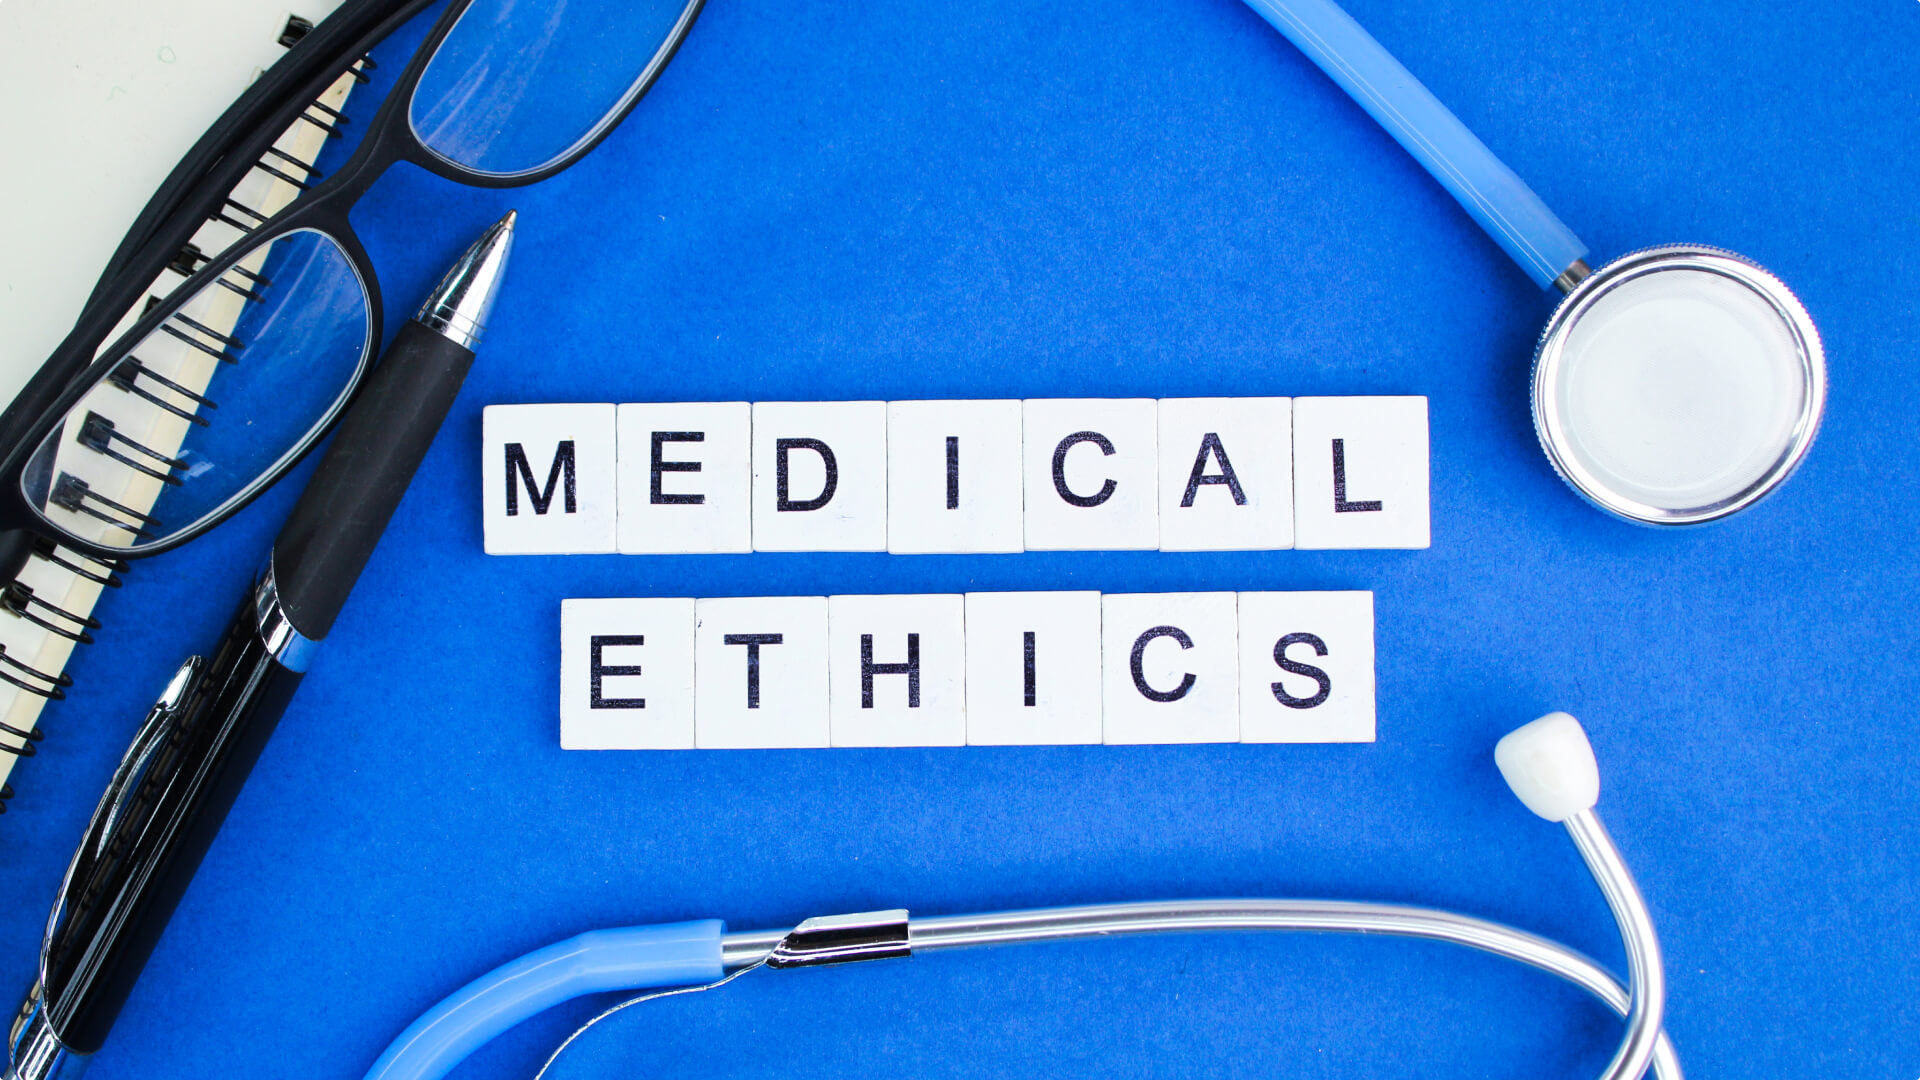 Stethoscope, eyeglasses, pen, and the words 'MEDICAL ETHICS' spelled out on tiles on a blue background, representing the ethical considerations in healthcare.